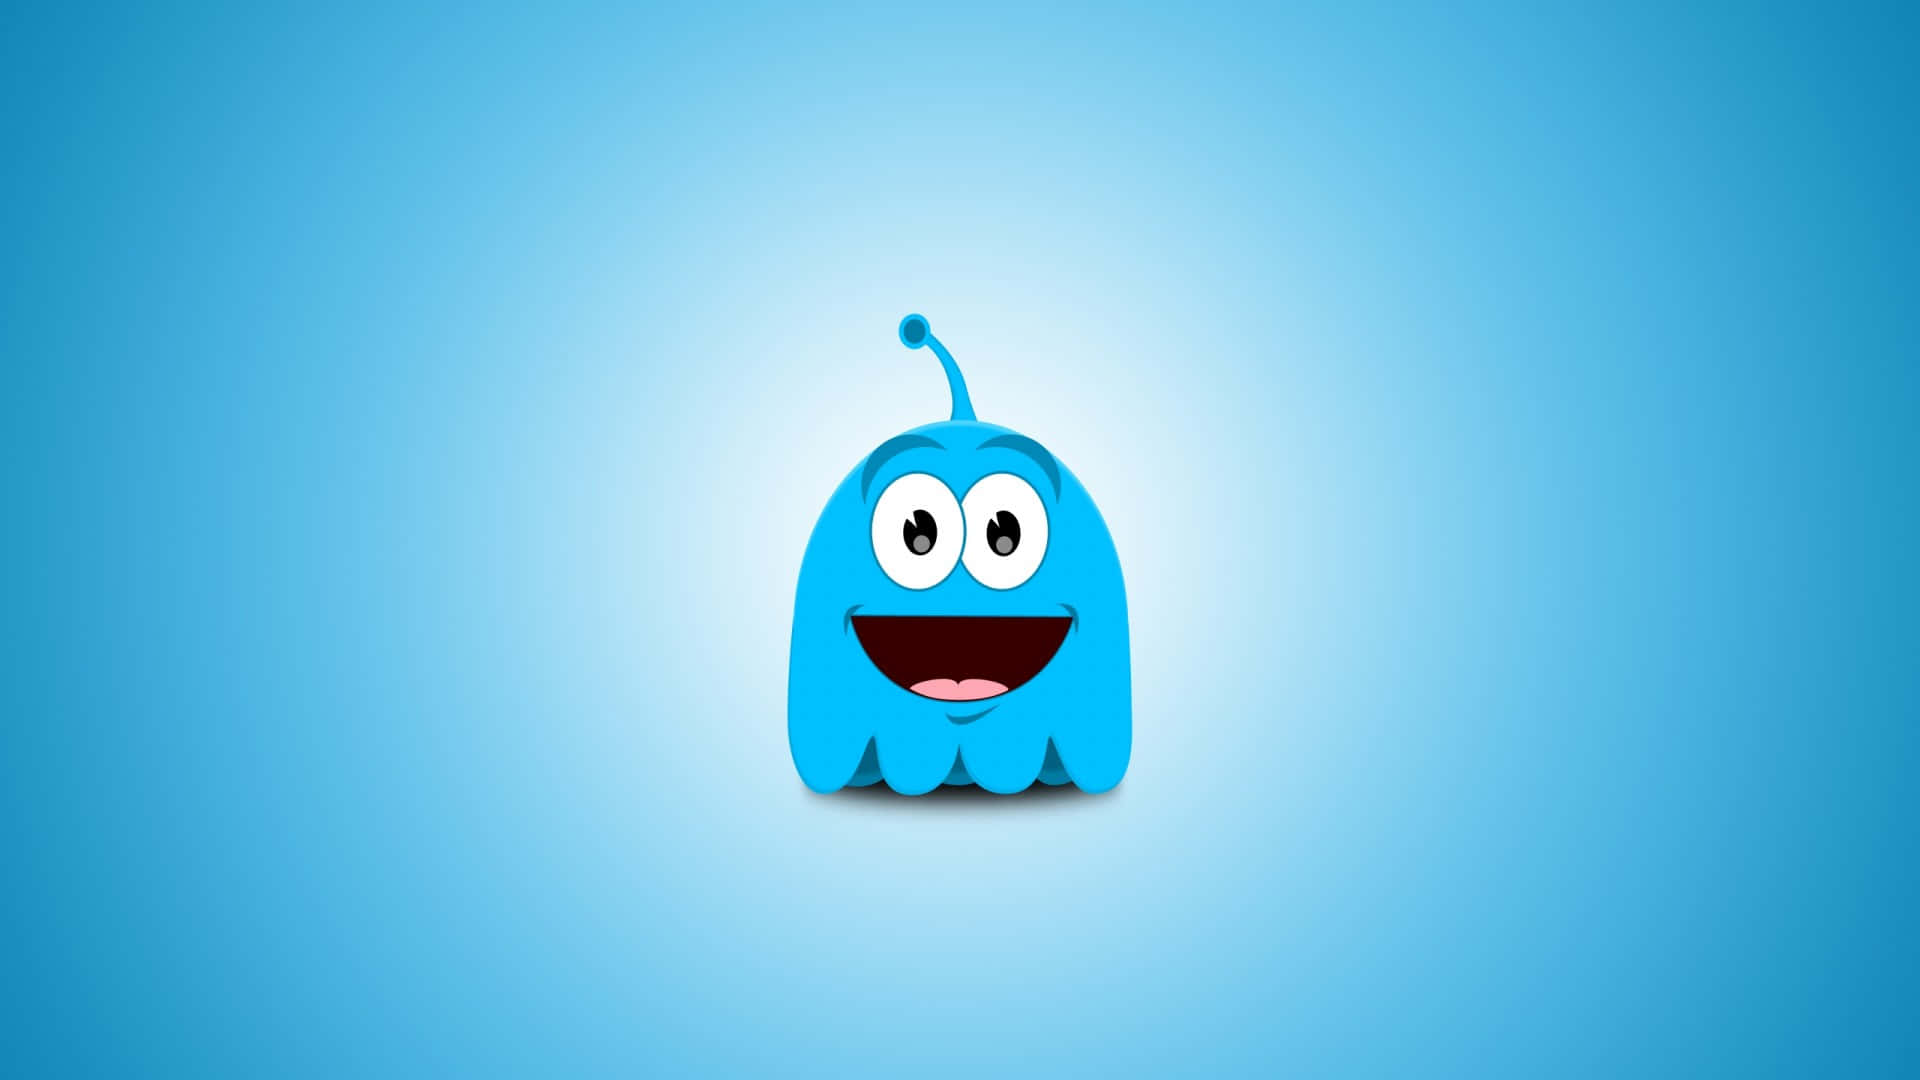 A Blue Cartoon Character With Eyes And Mouth